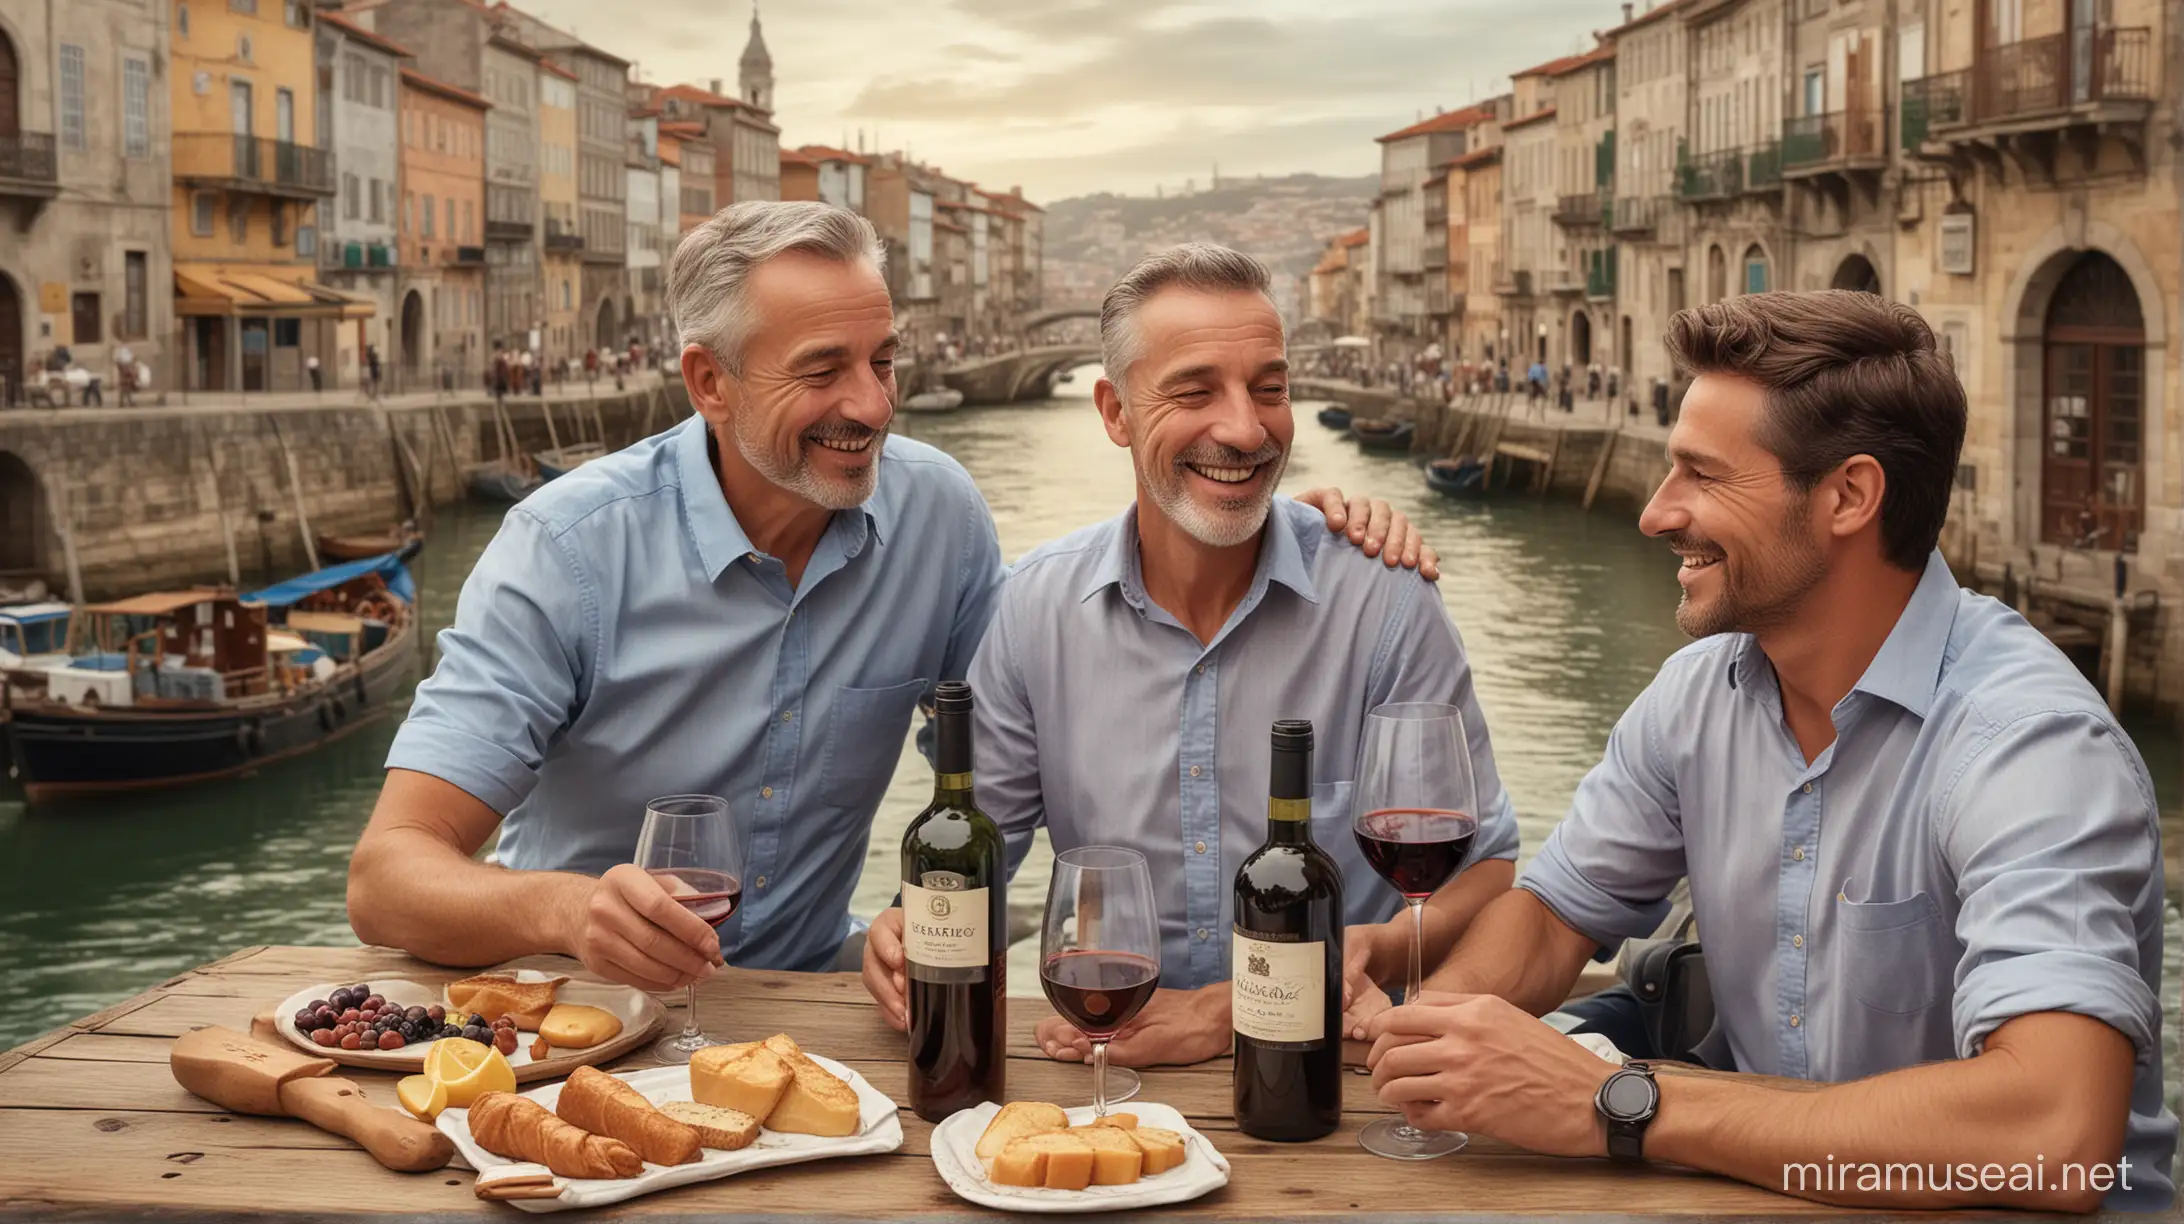 dreamy hyper realistic vacation picture with a dad celebrating his 60th birthday and his two sons in Porto, Lisbon with lots of port wine